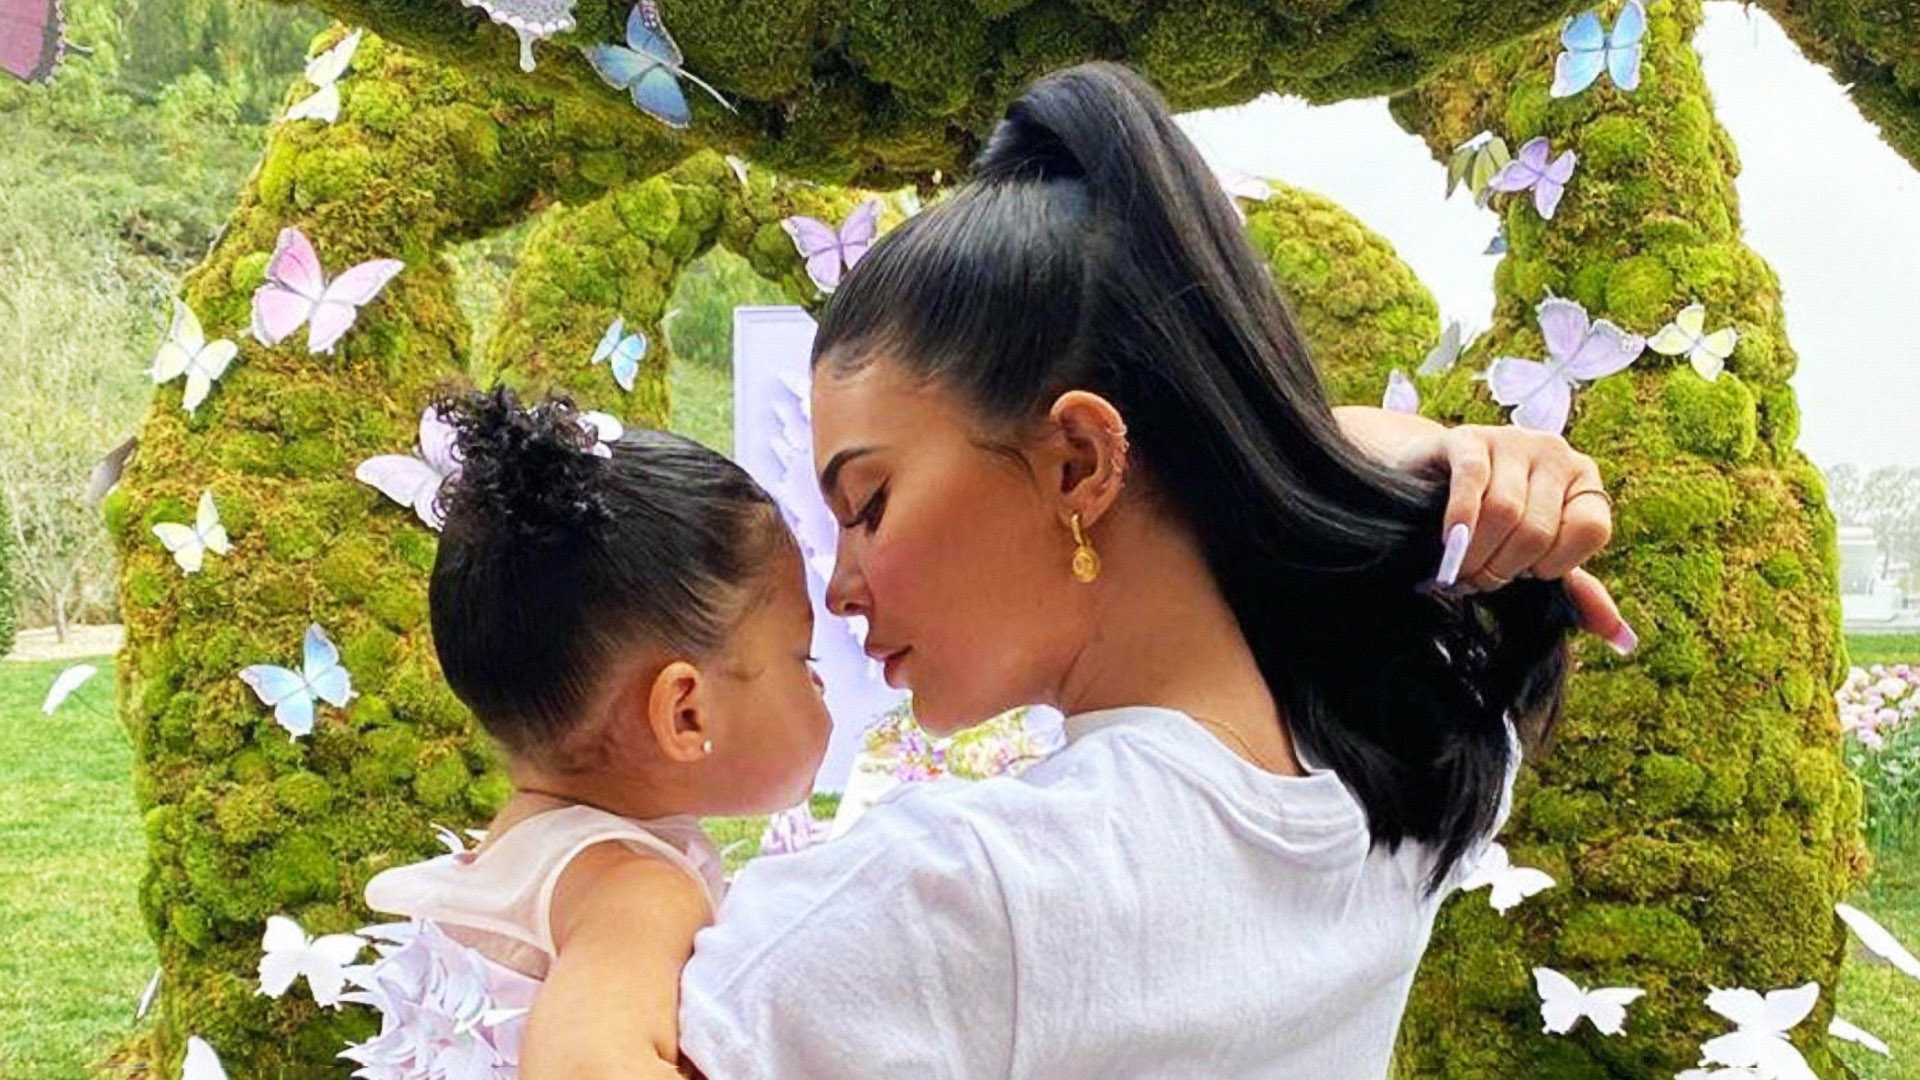 The 5 Most Expensive Outfits Worn By The Kardashian Kids, Ranked